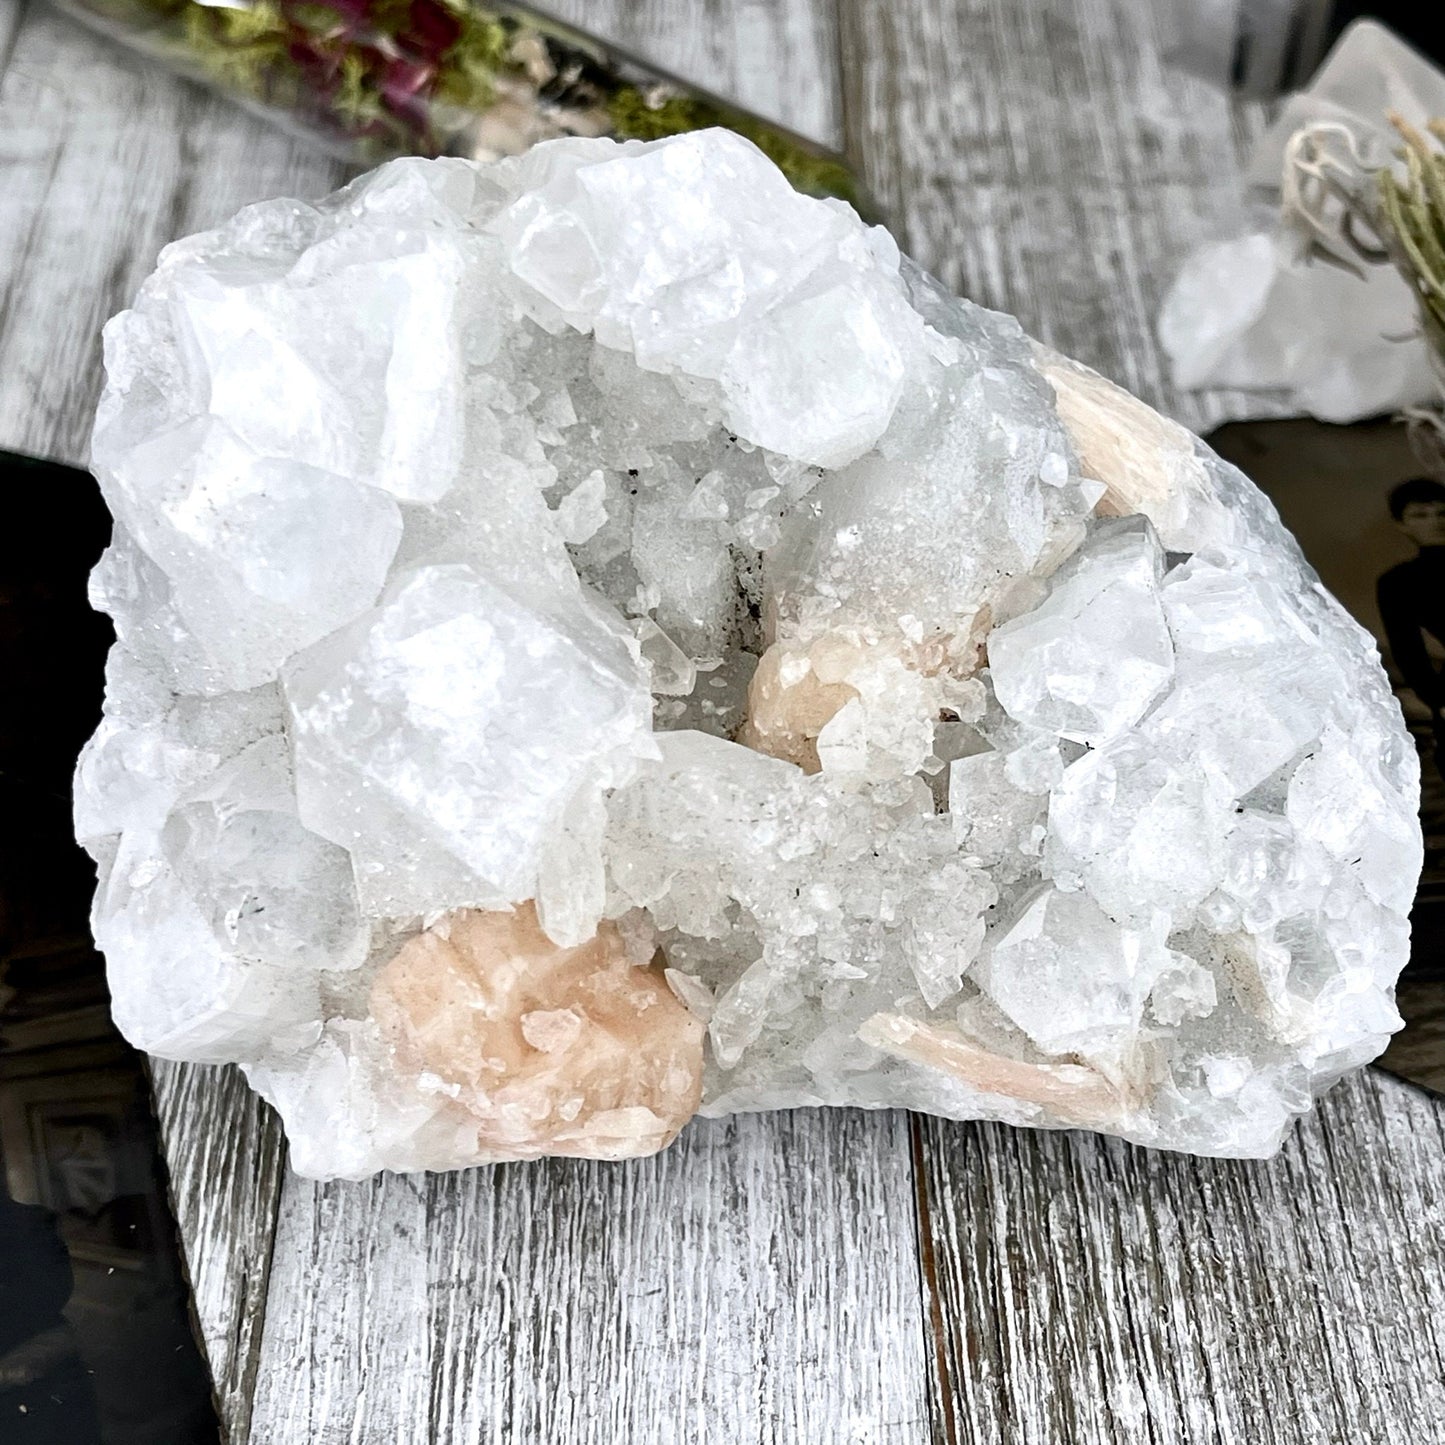 Apophyllite, Big Crystal, Crystal cluster, Crystal Decor, Crystal Geode, Crystal Point, Crystal Sphere, Crystals, Etsy ID: 1620549288, healing crystals, Home & Living, Home Decor, large crystal, raw crystal, Rocks & Geodes